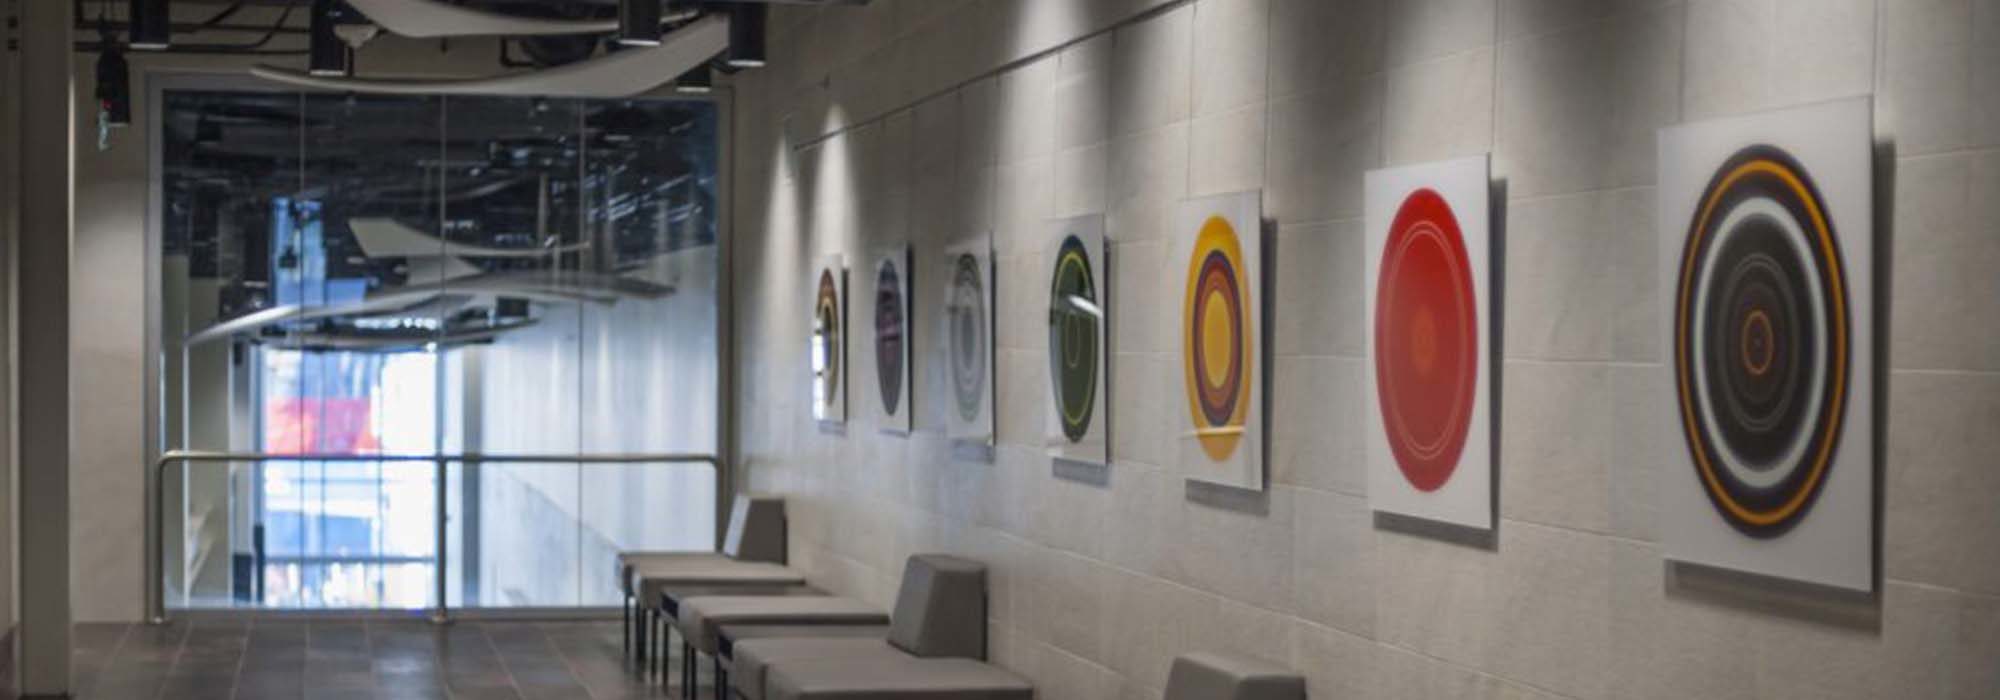 Peter Wilkin's Music to your Eyes collection is displayed on a wall